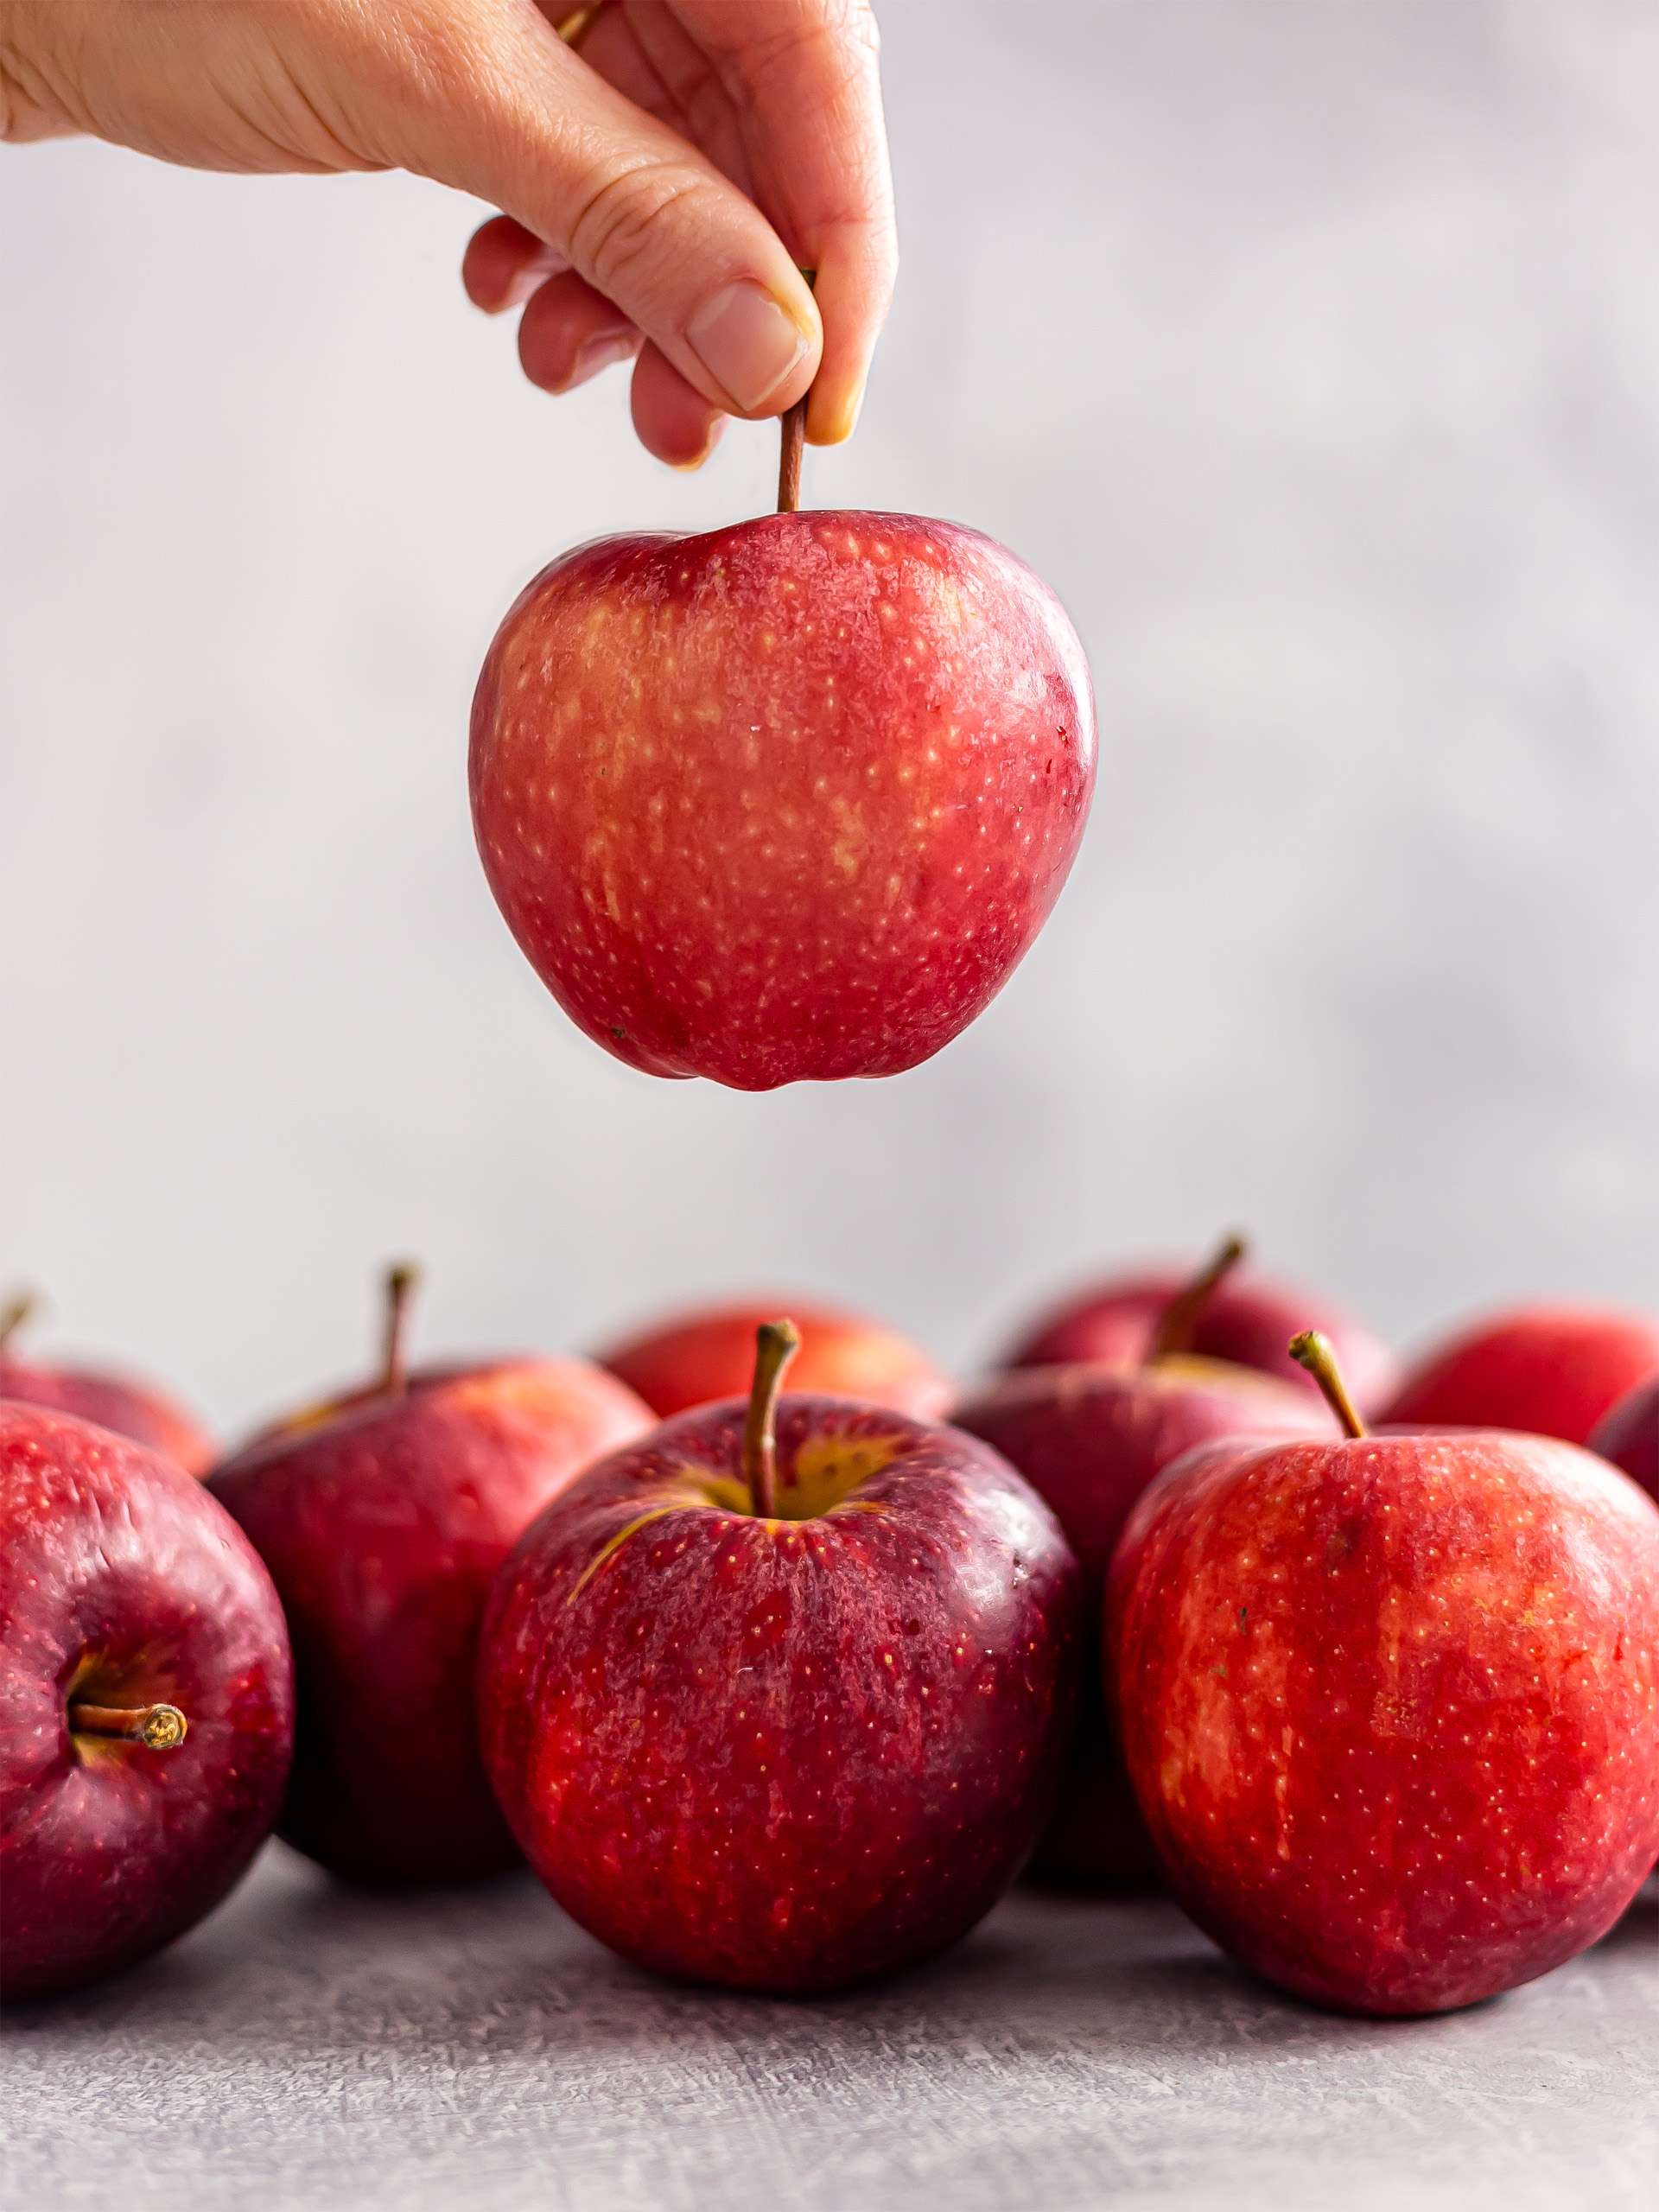 8 Healthy Ways to Use Apples in the Kitchen